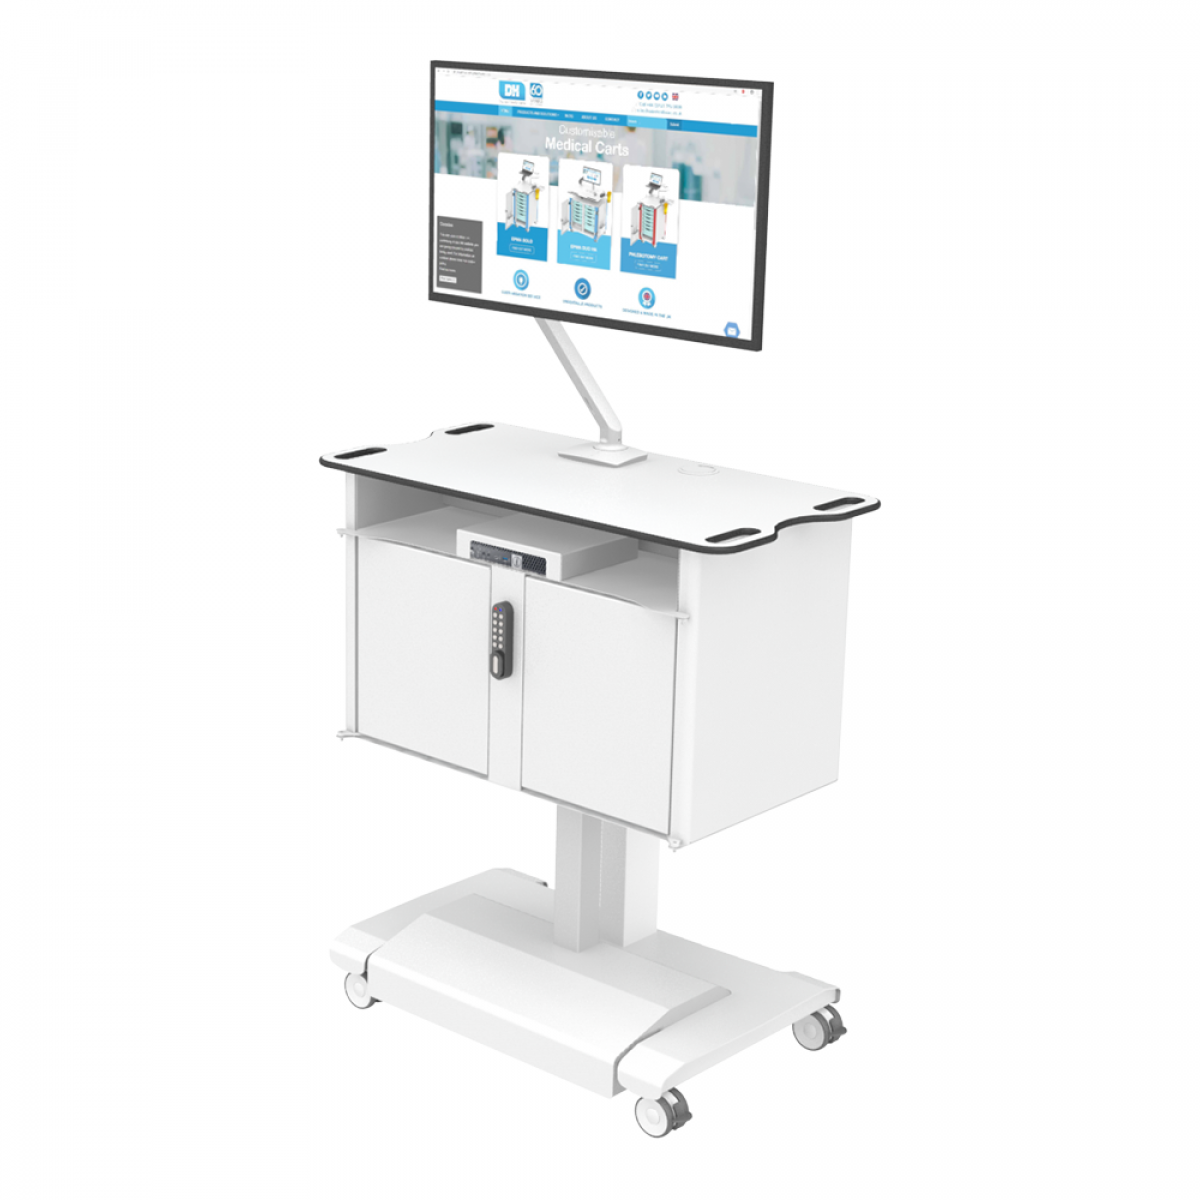 The lockable storage MediCab Duo from Dalen Healthcare